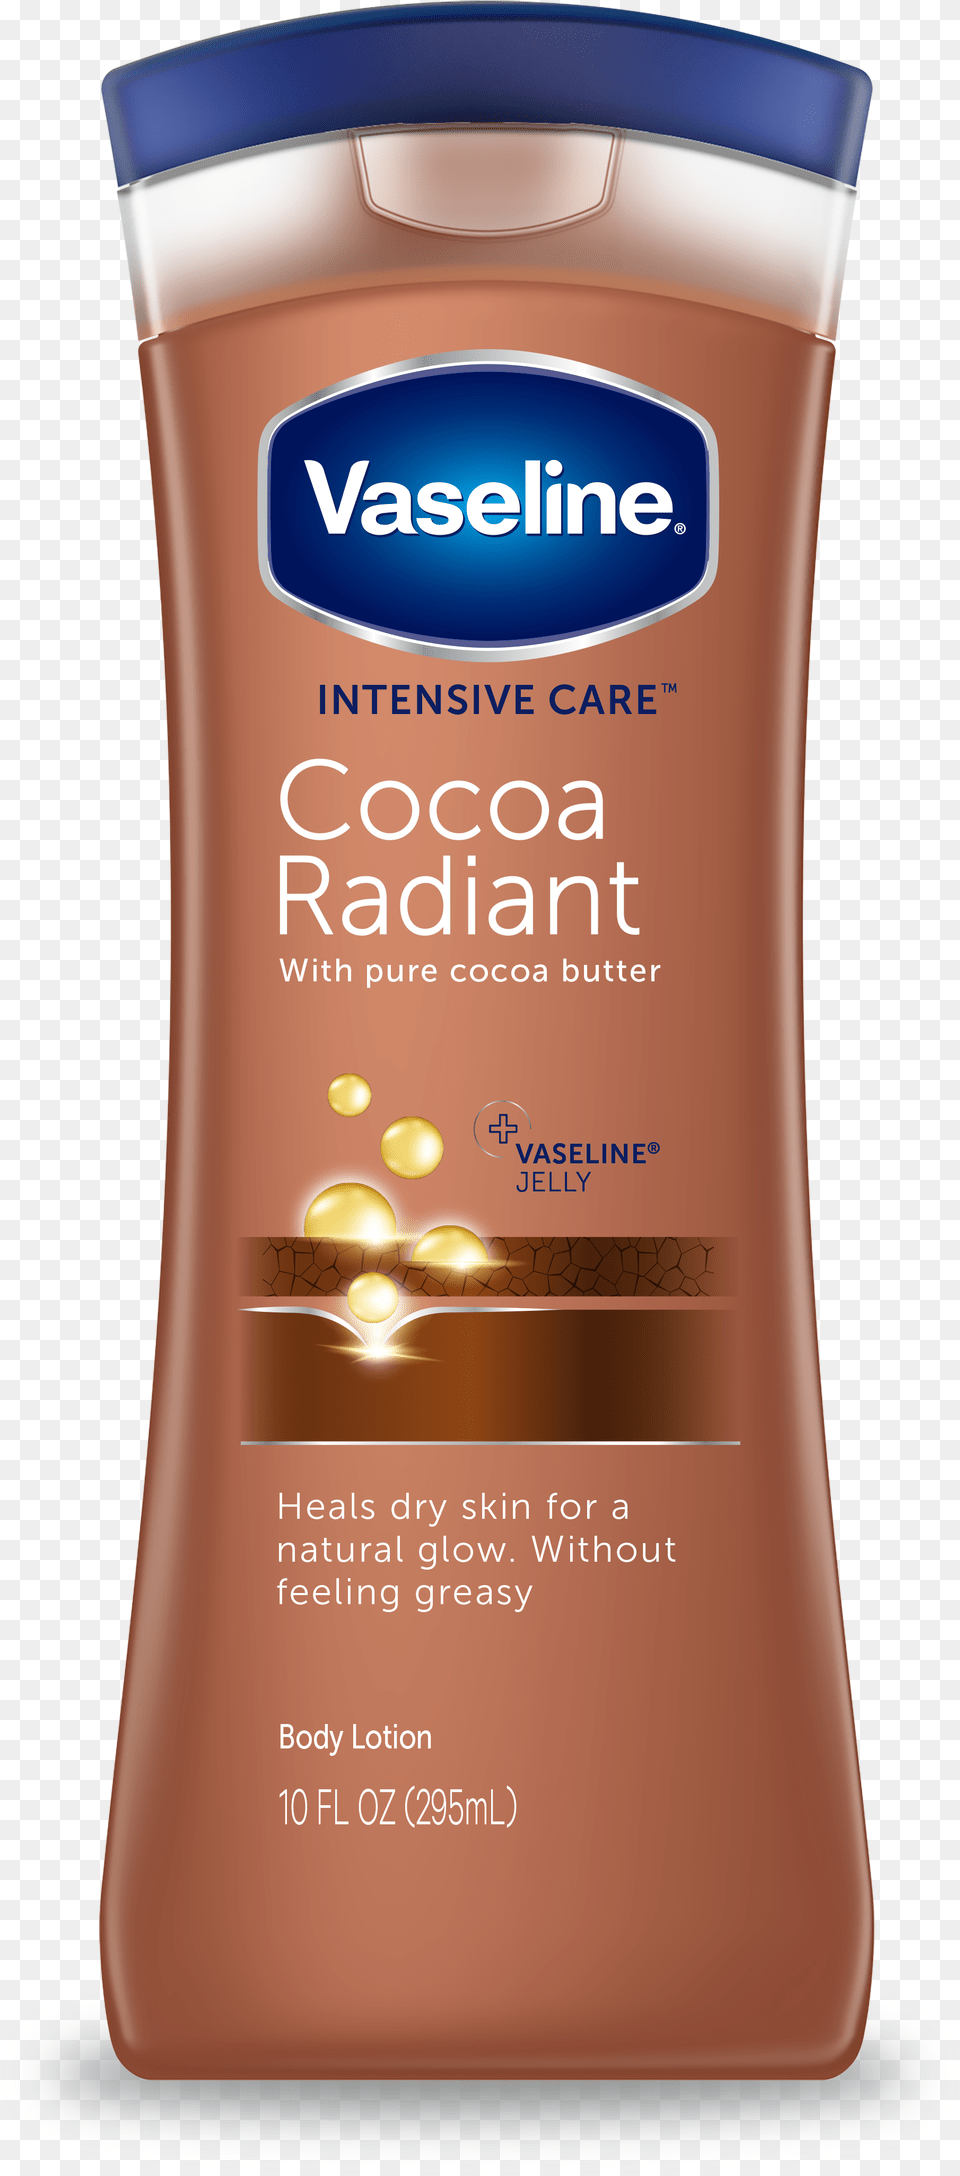 Vaseline Intensive Care Body Lotion Cocoa Radiant Chocolate, Bottle, Shaker Png